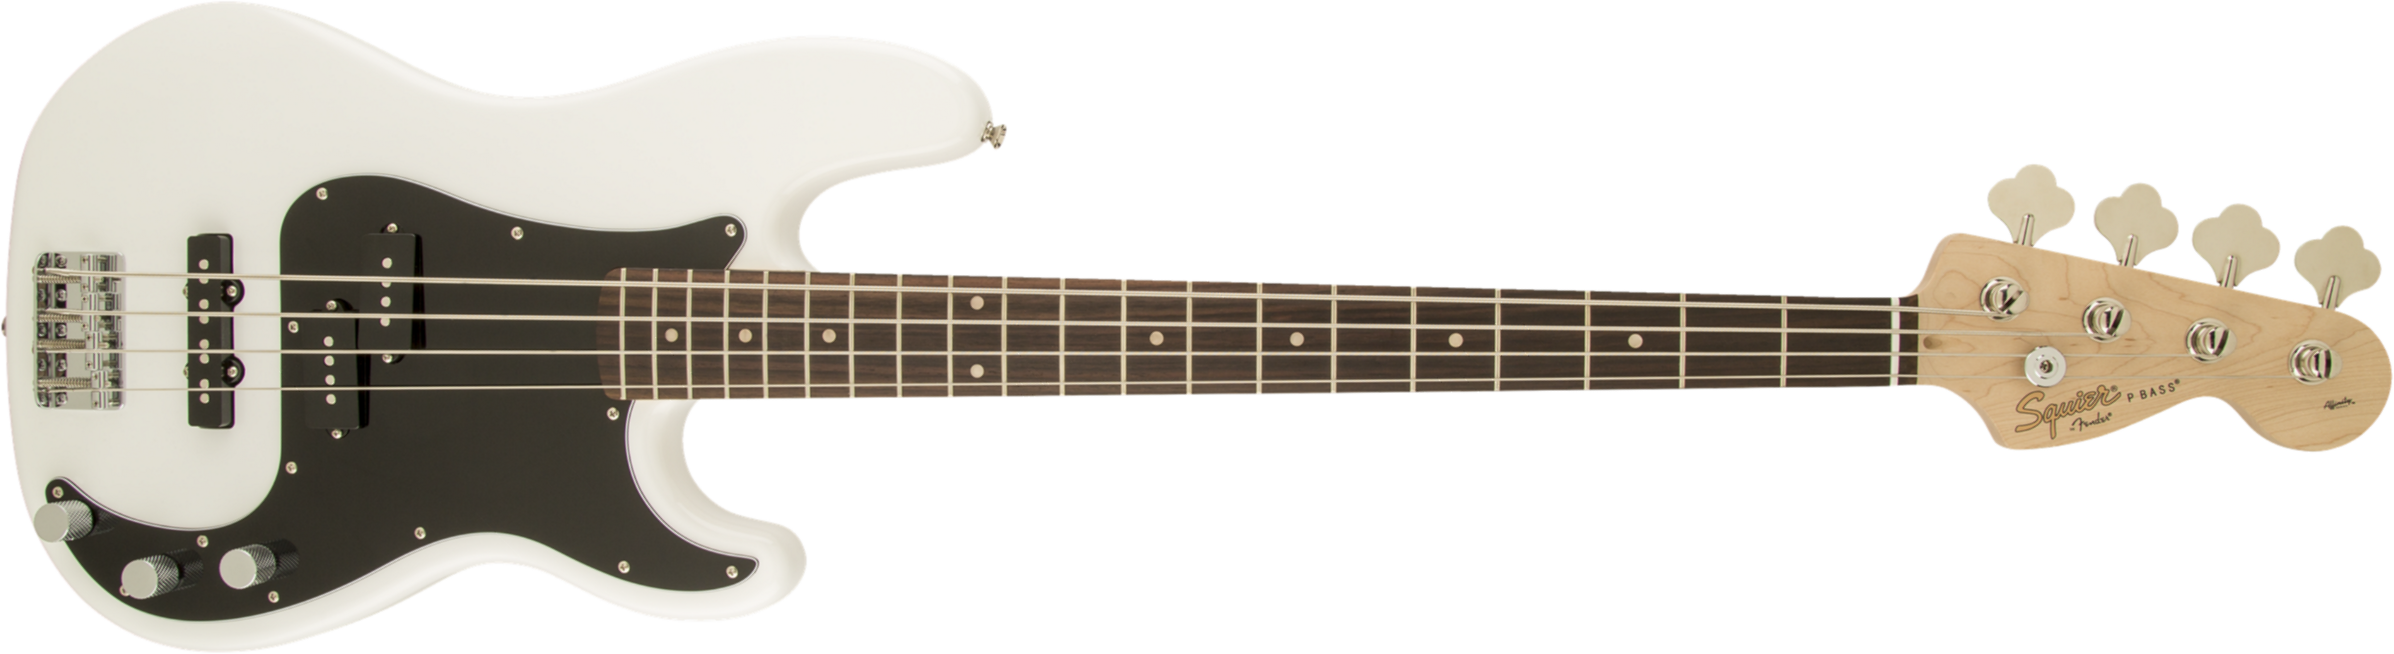 Squier Precision Bass Affinity Series Pj (lau) - Olympic White - Solid body elektrische bas - Main picture